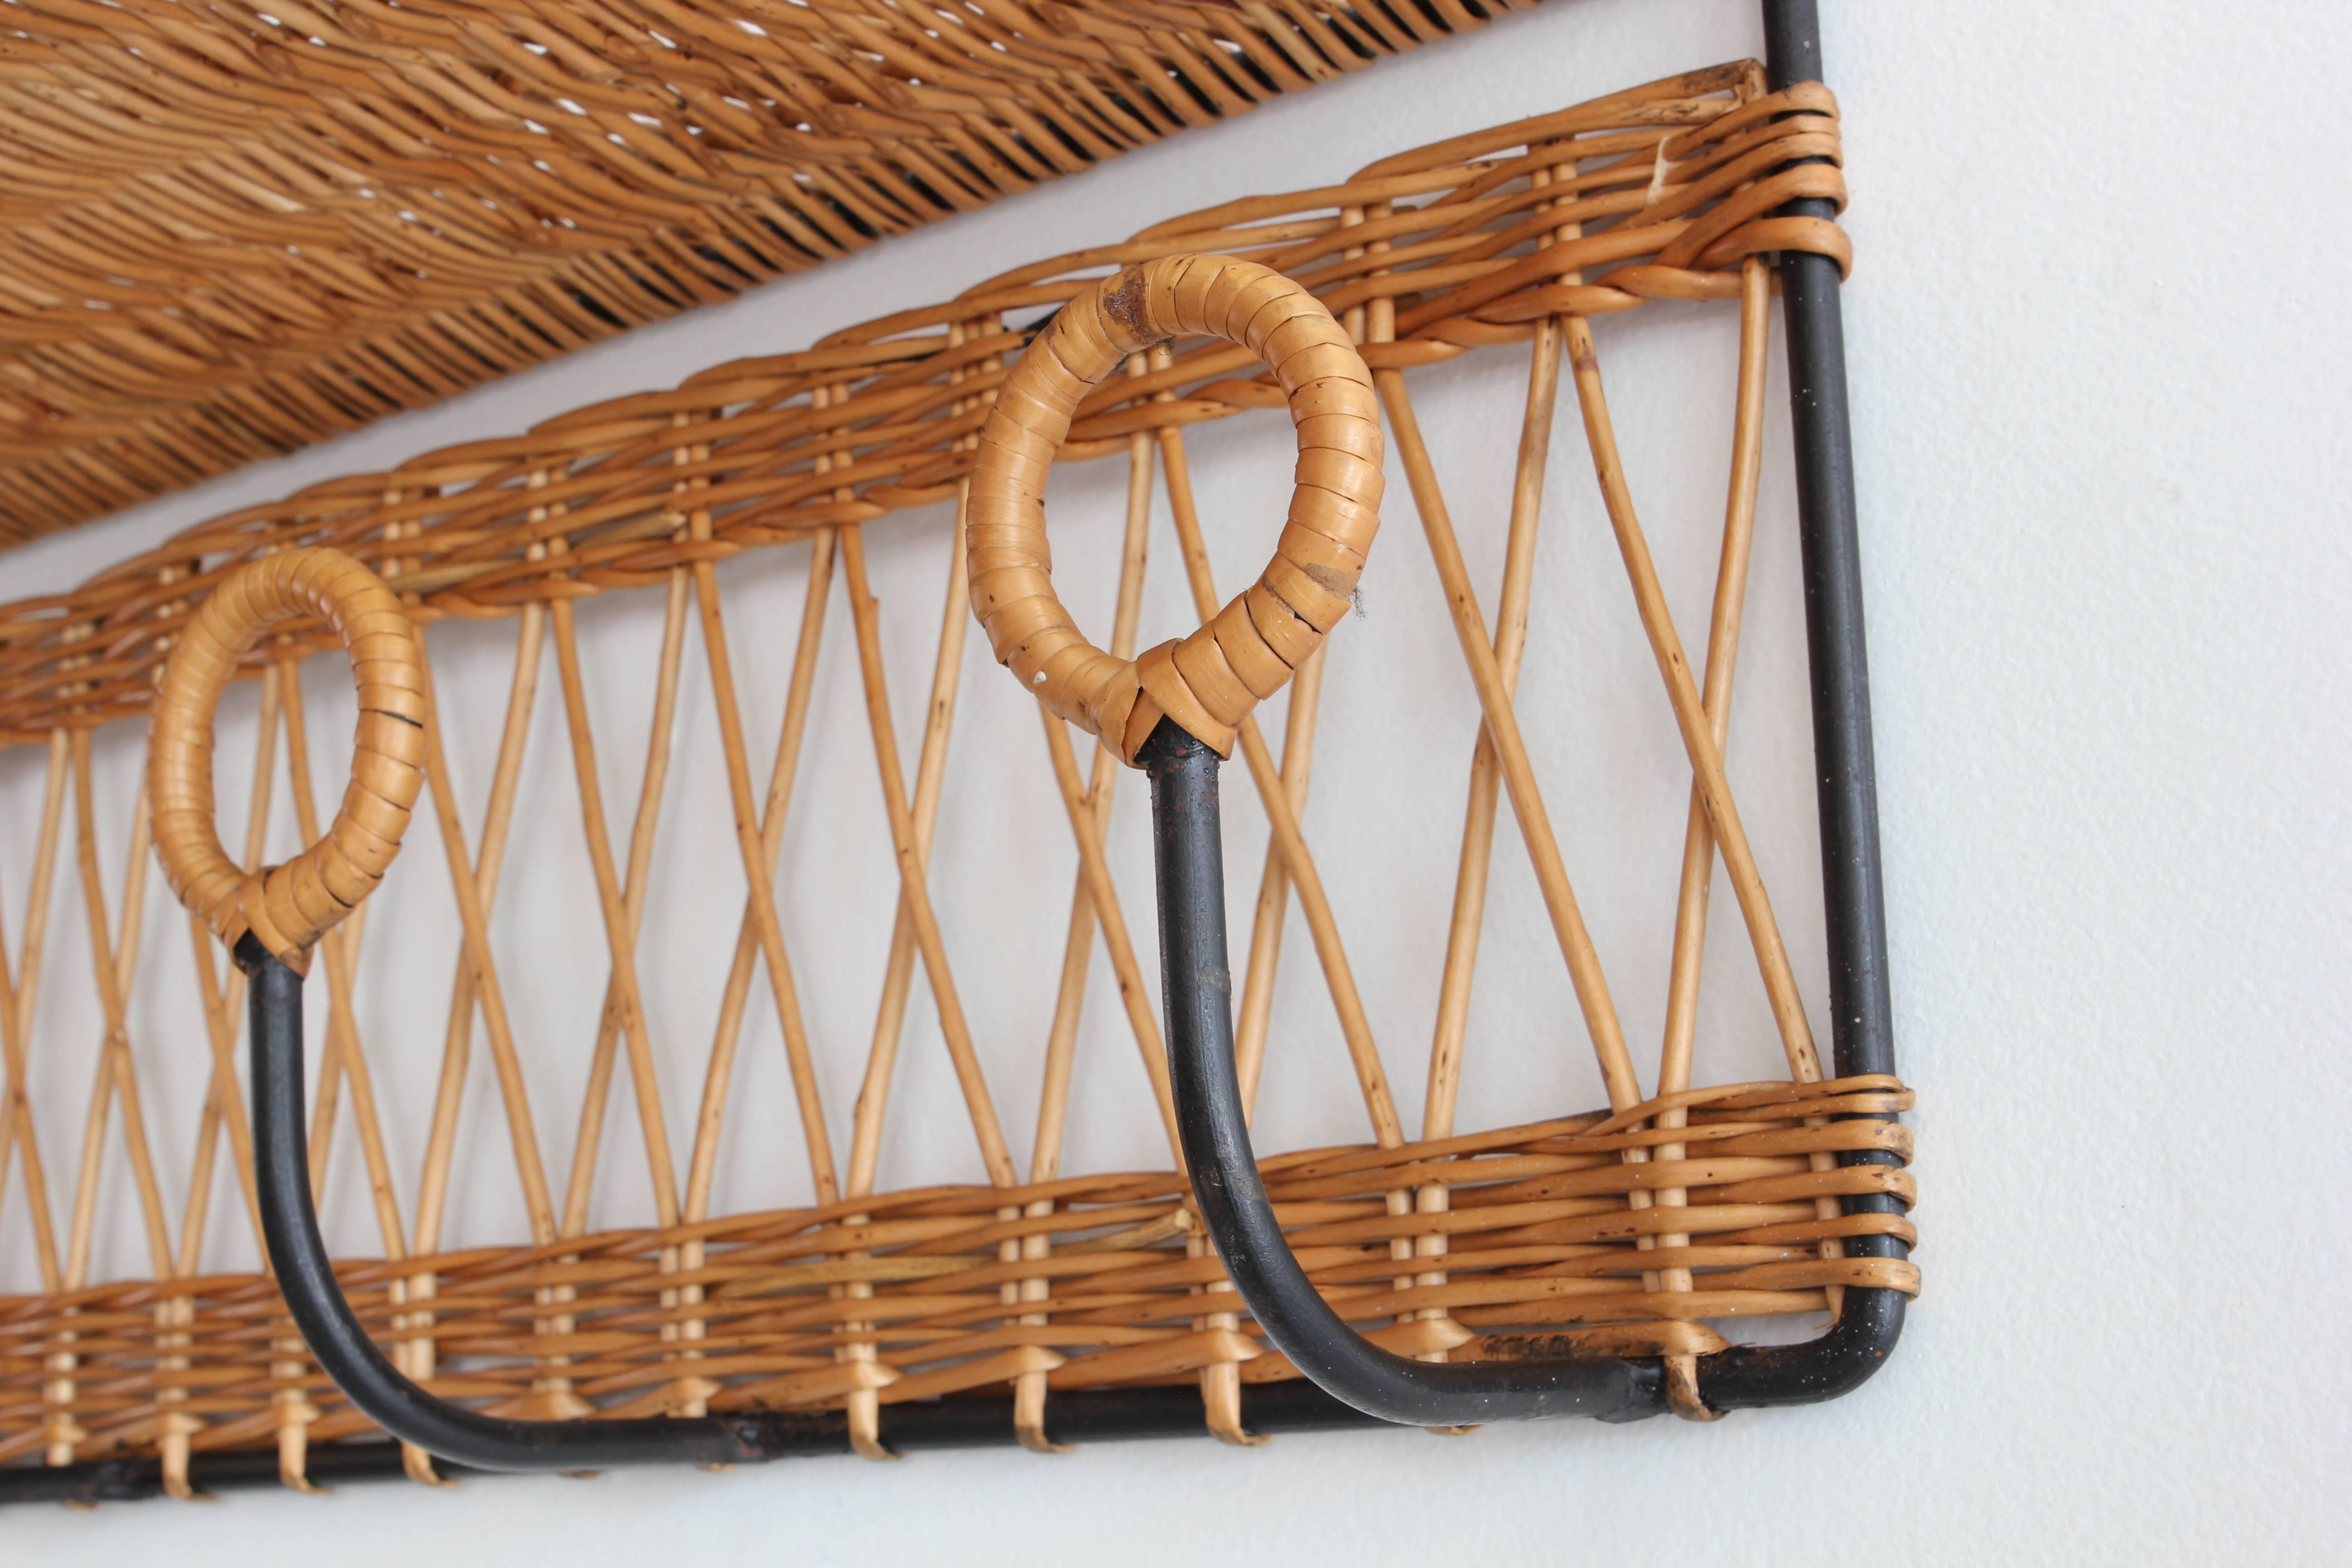 Mid-20th Century French Iron and Wicker Train Shelf Attributed to Jacques Adnet